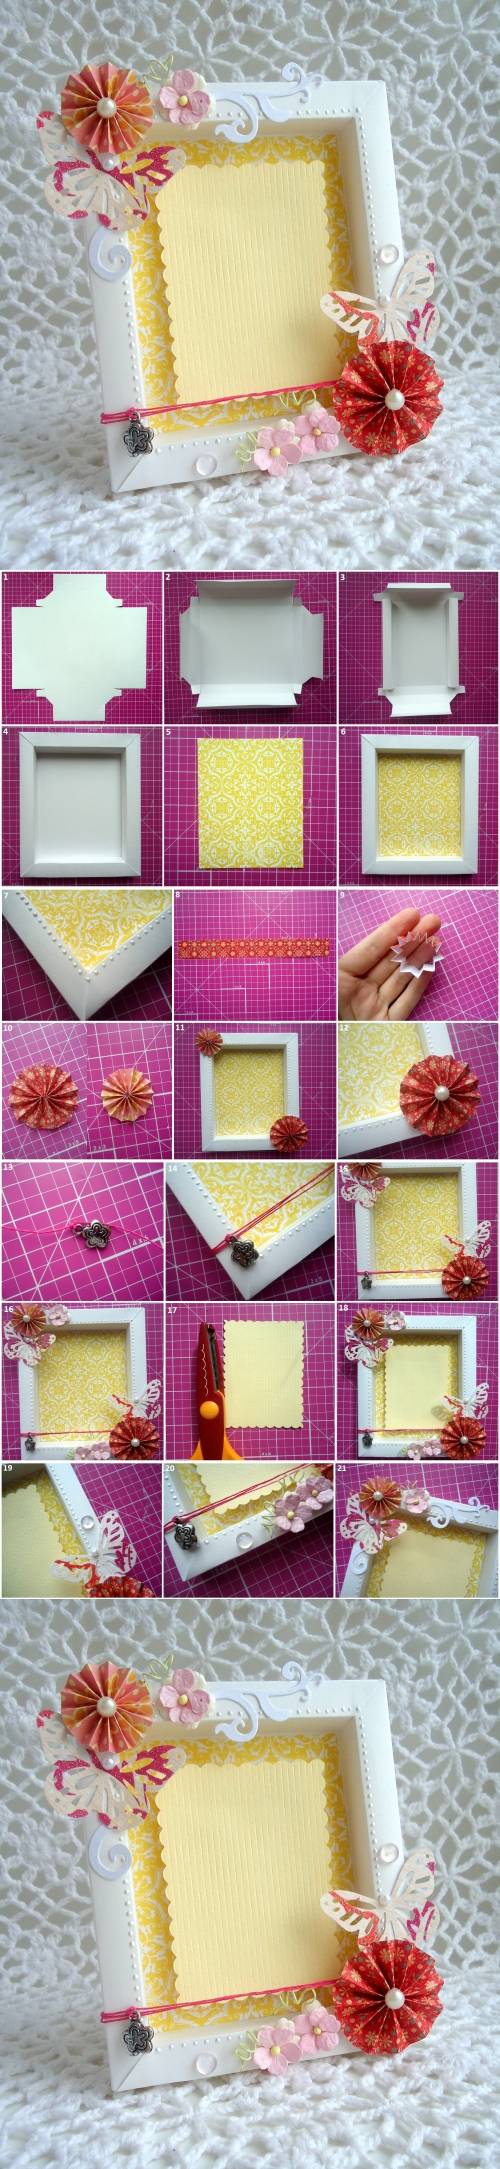 Cool Pic Frame DIY Projects